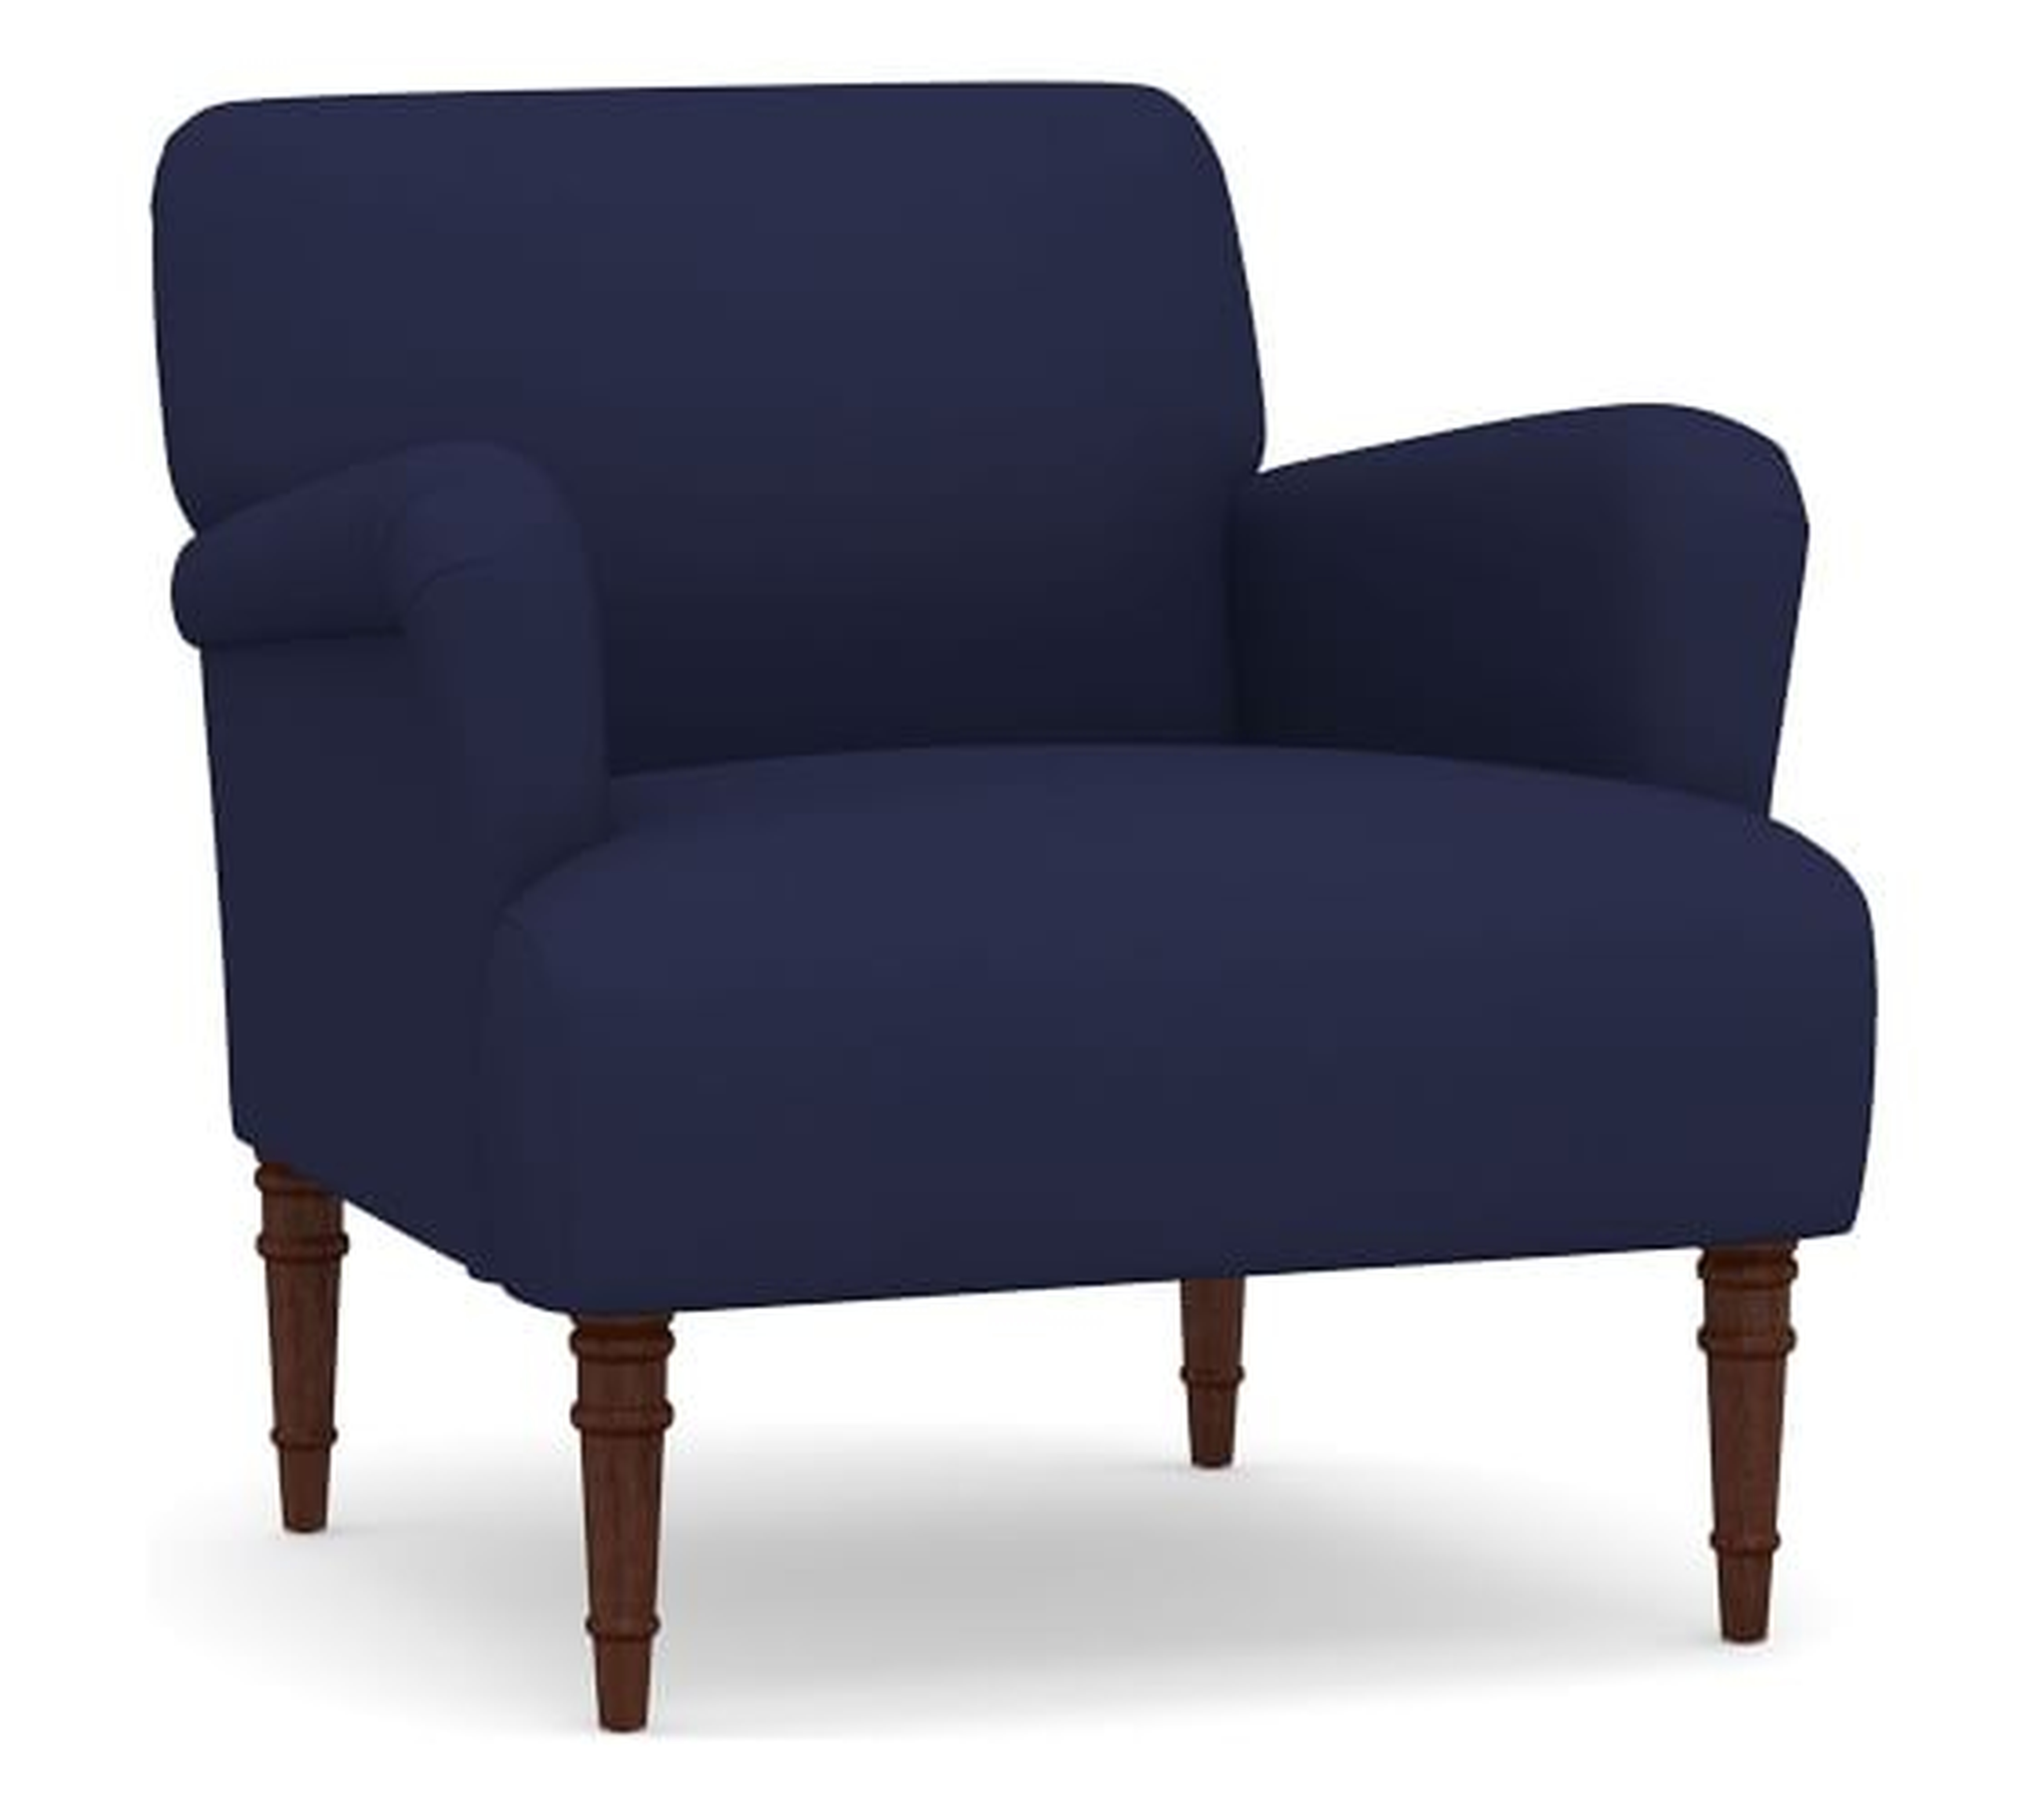 Morgan Upholstered Armchair, Polyester Wrapped Cushions, Performance Twill, Cadet Navy - Pottery Barn